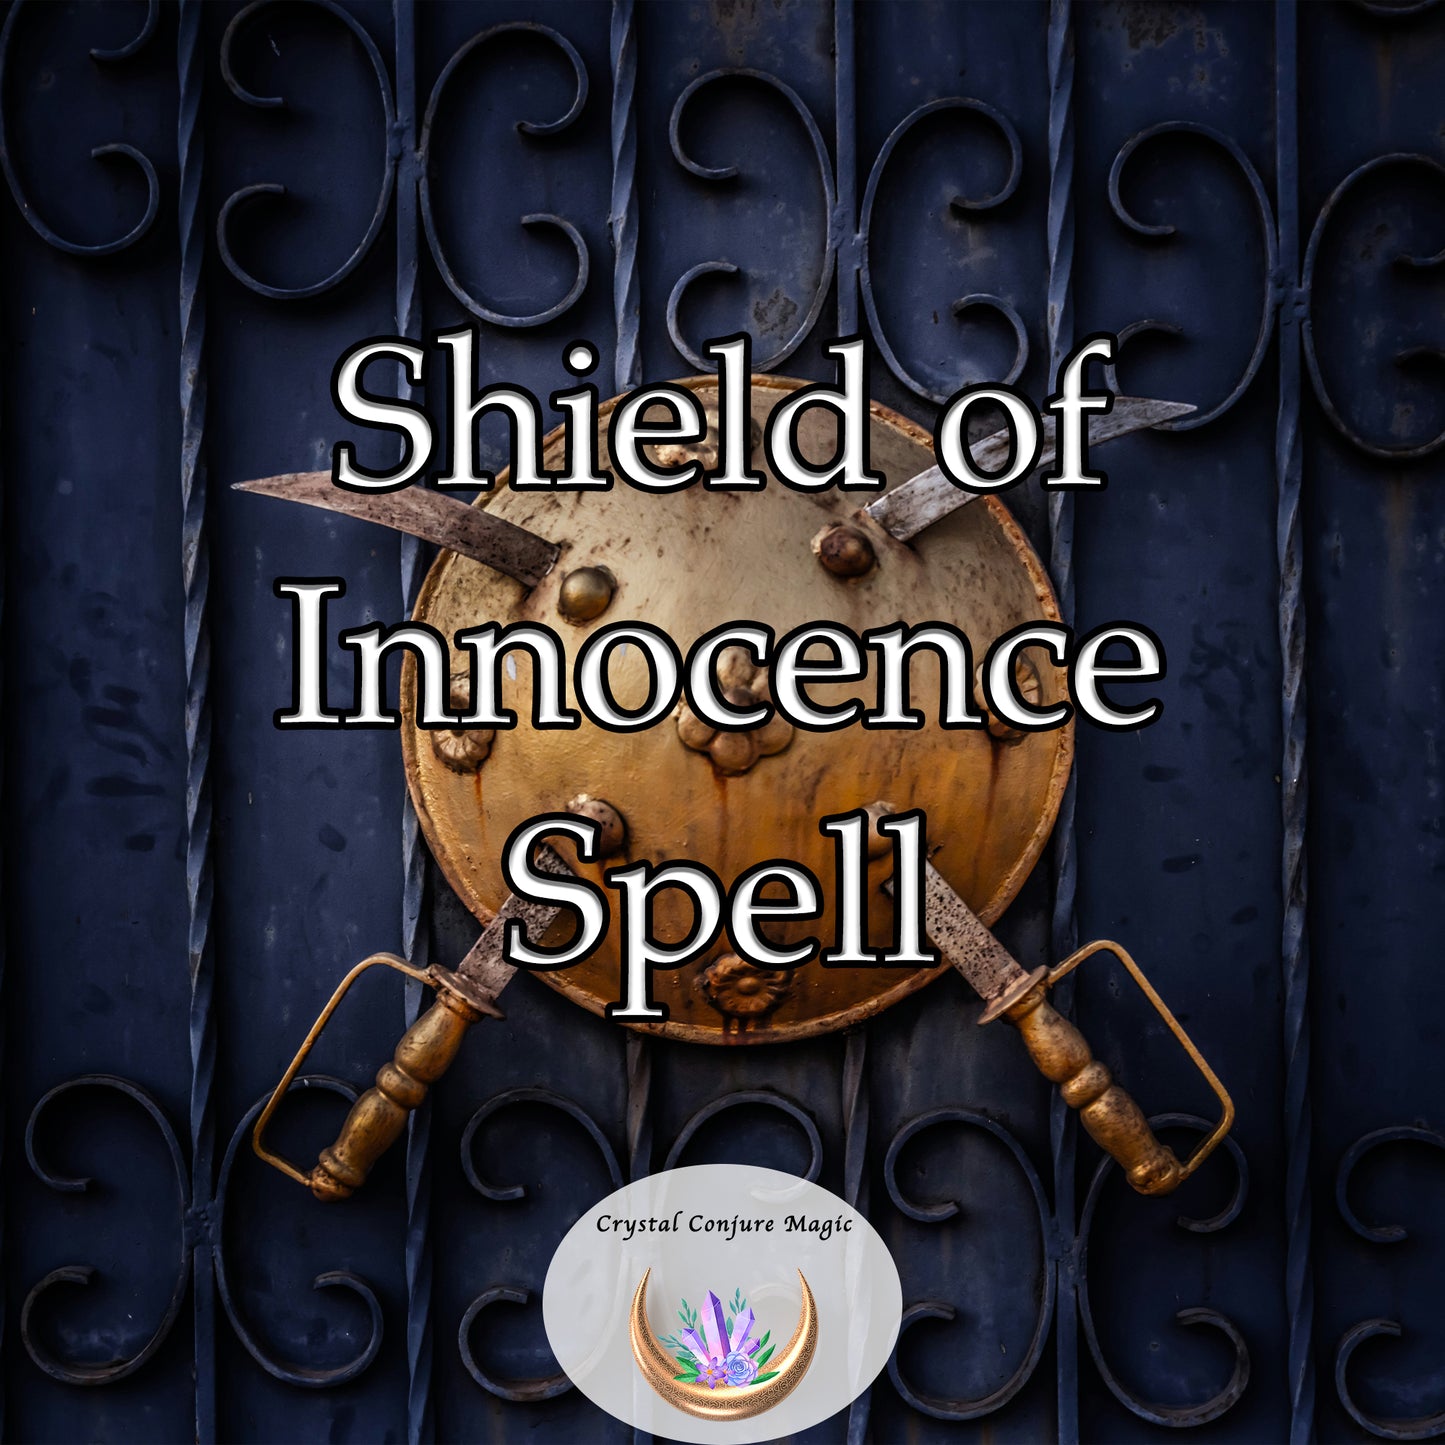 Shield of Innocence Spell - ward off dark forces and ensuring the safety of the innocent